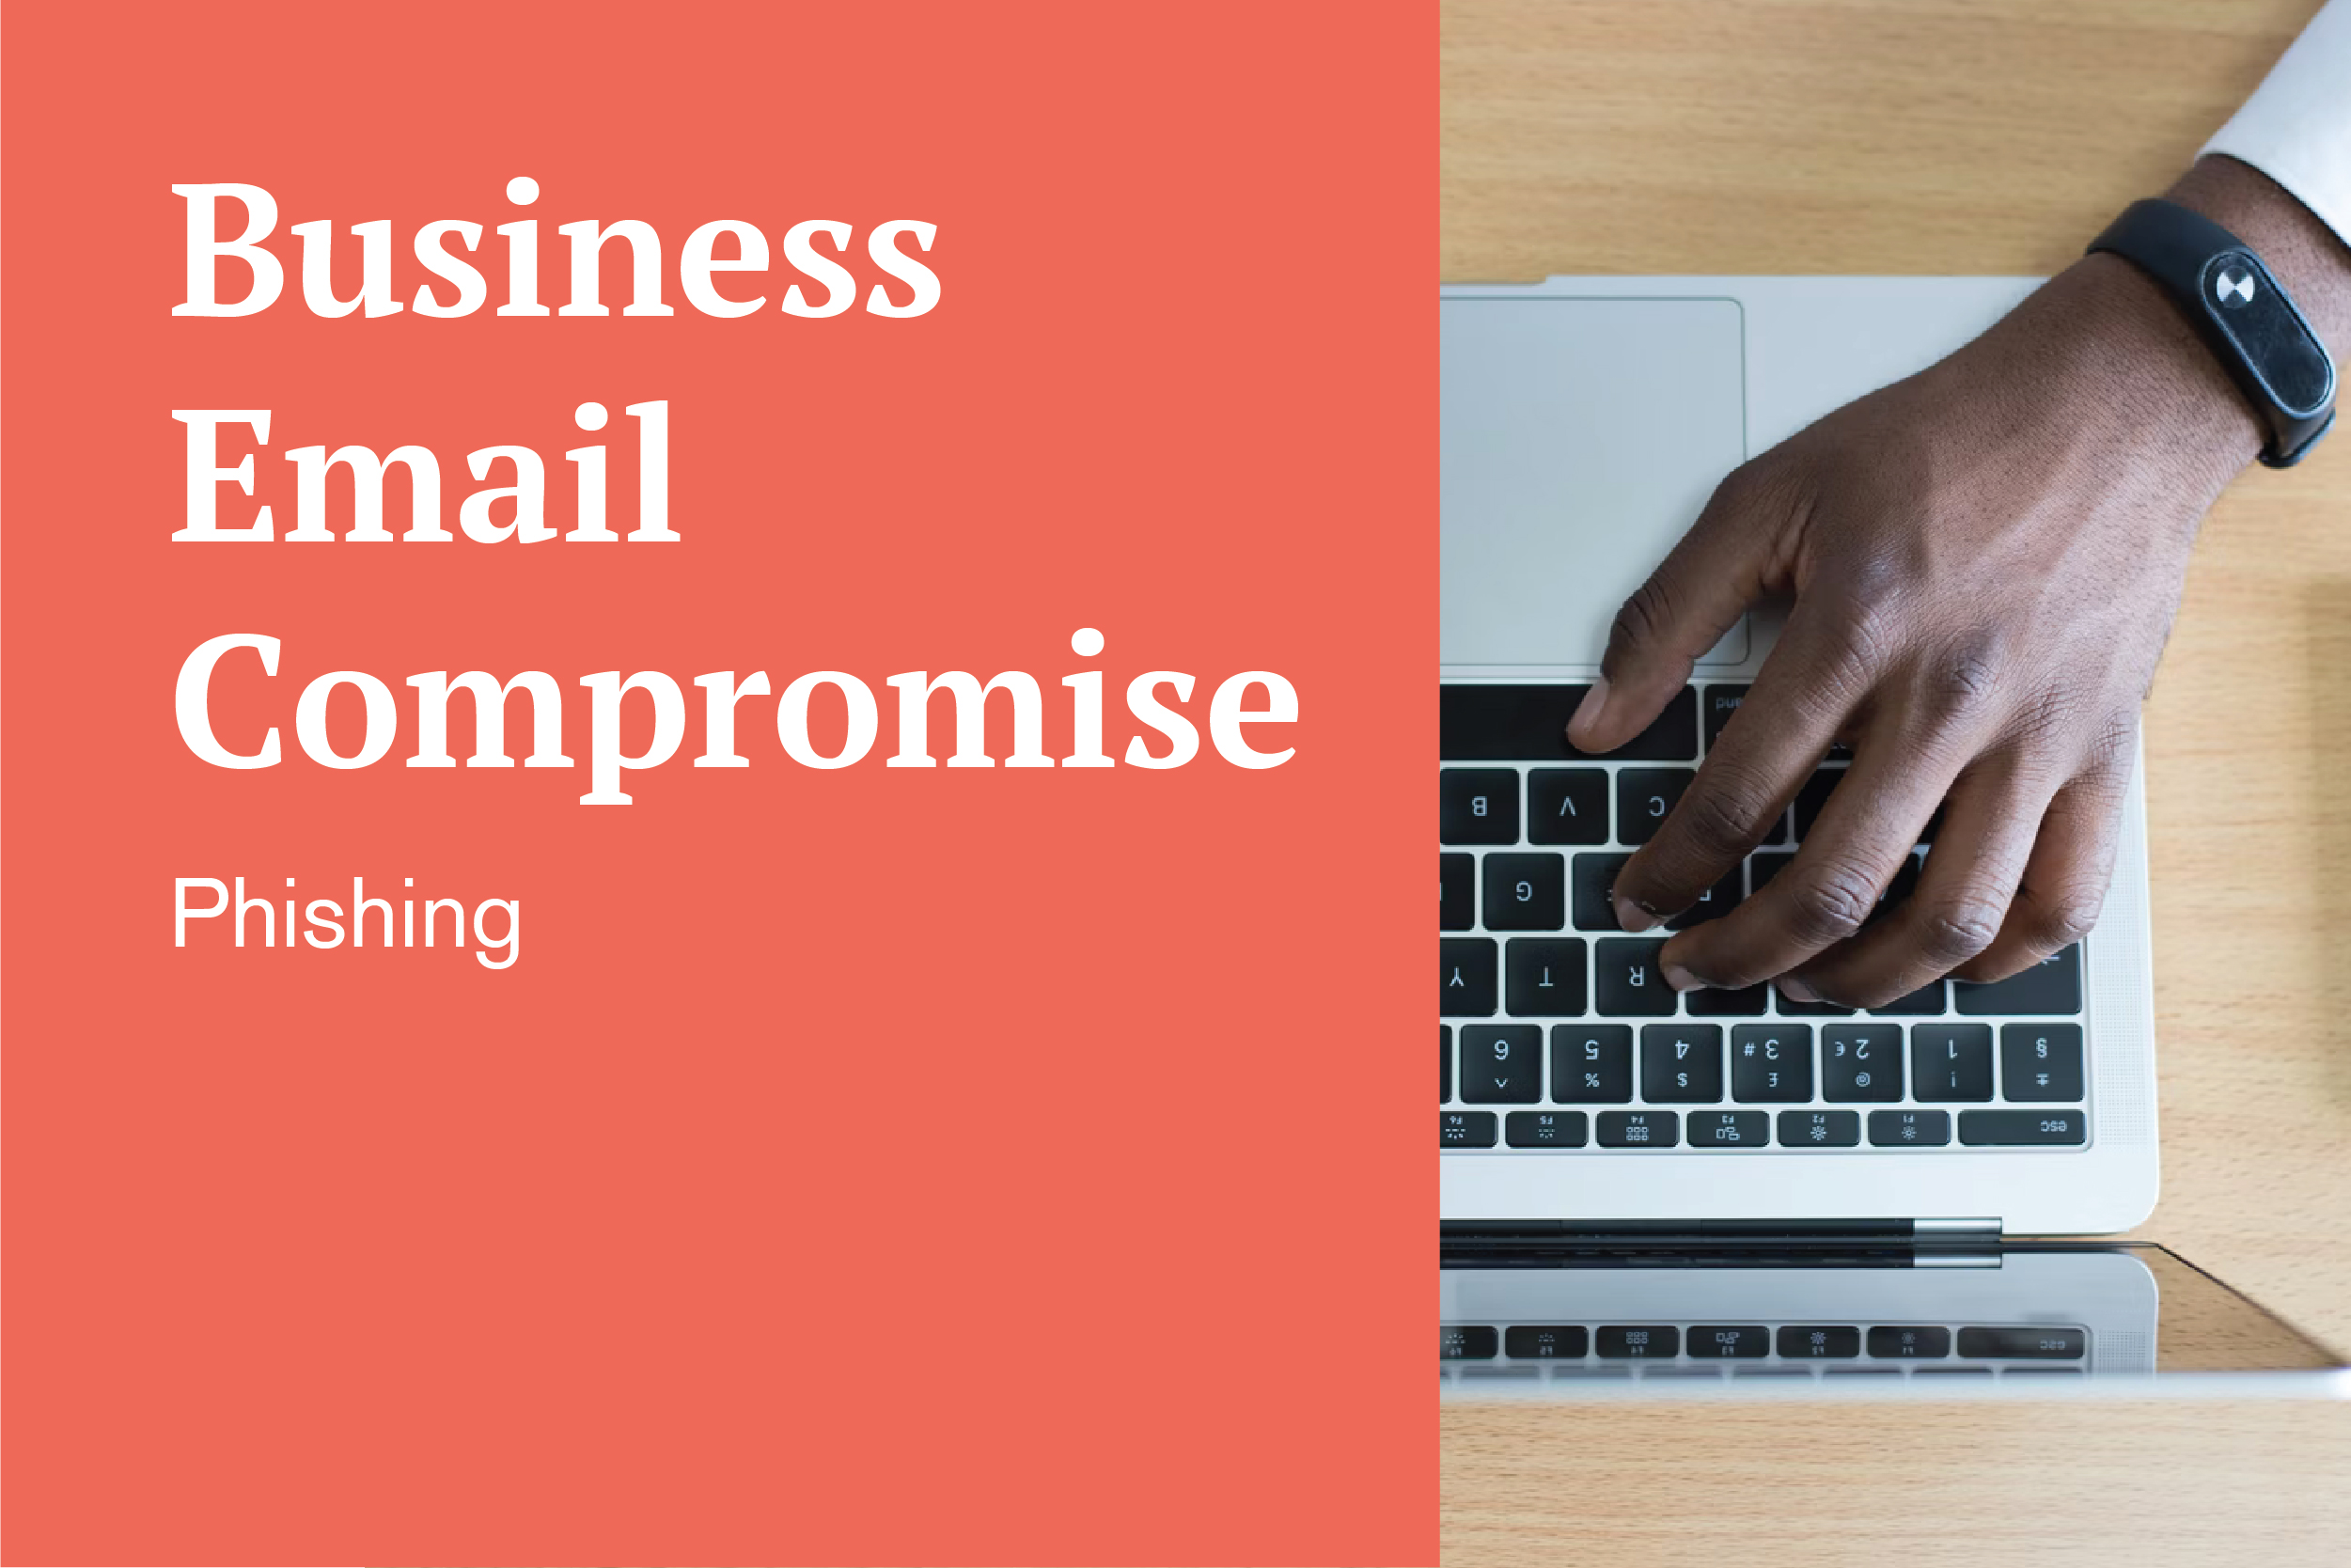 Business Email Compromise